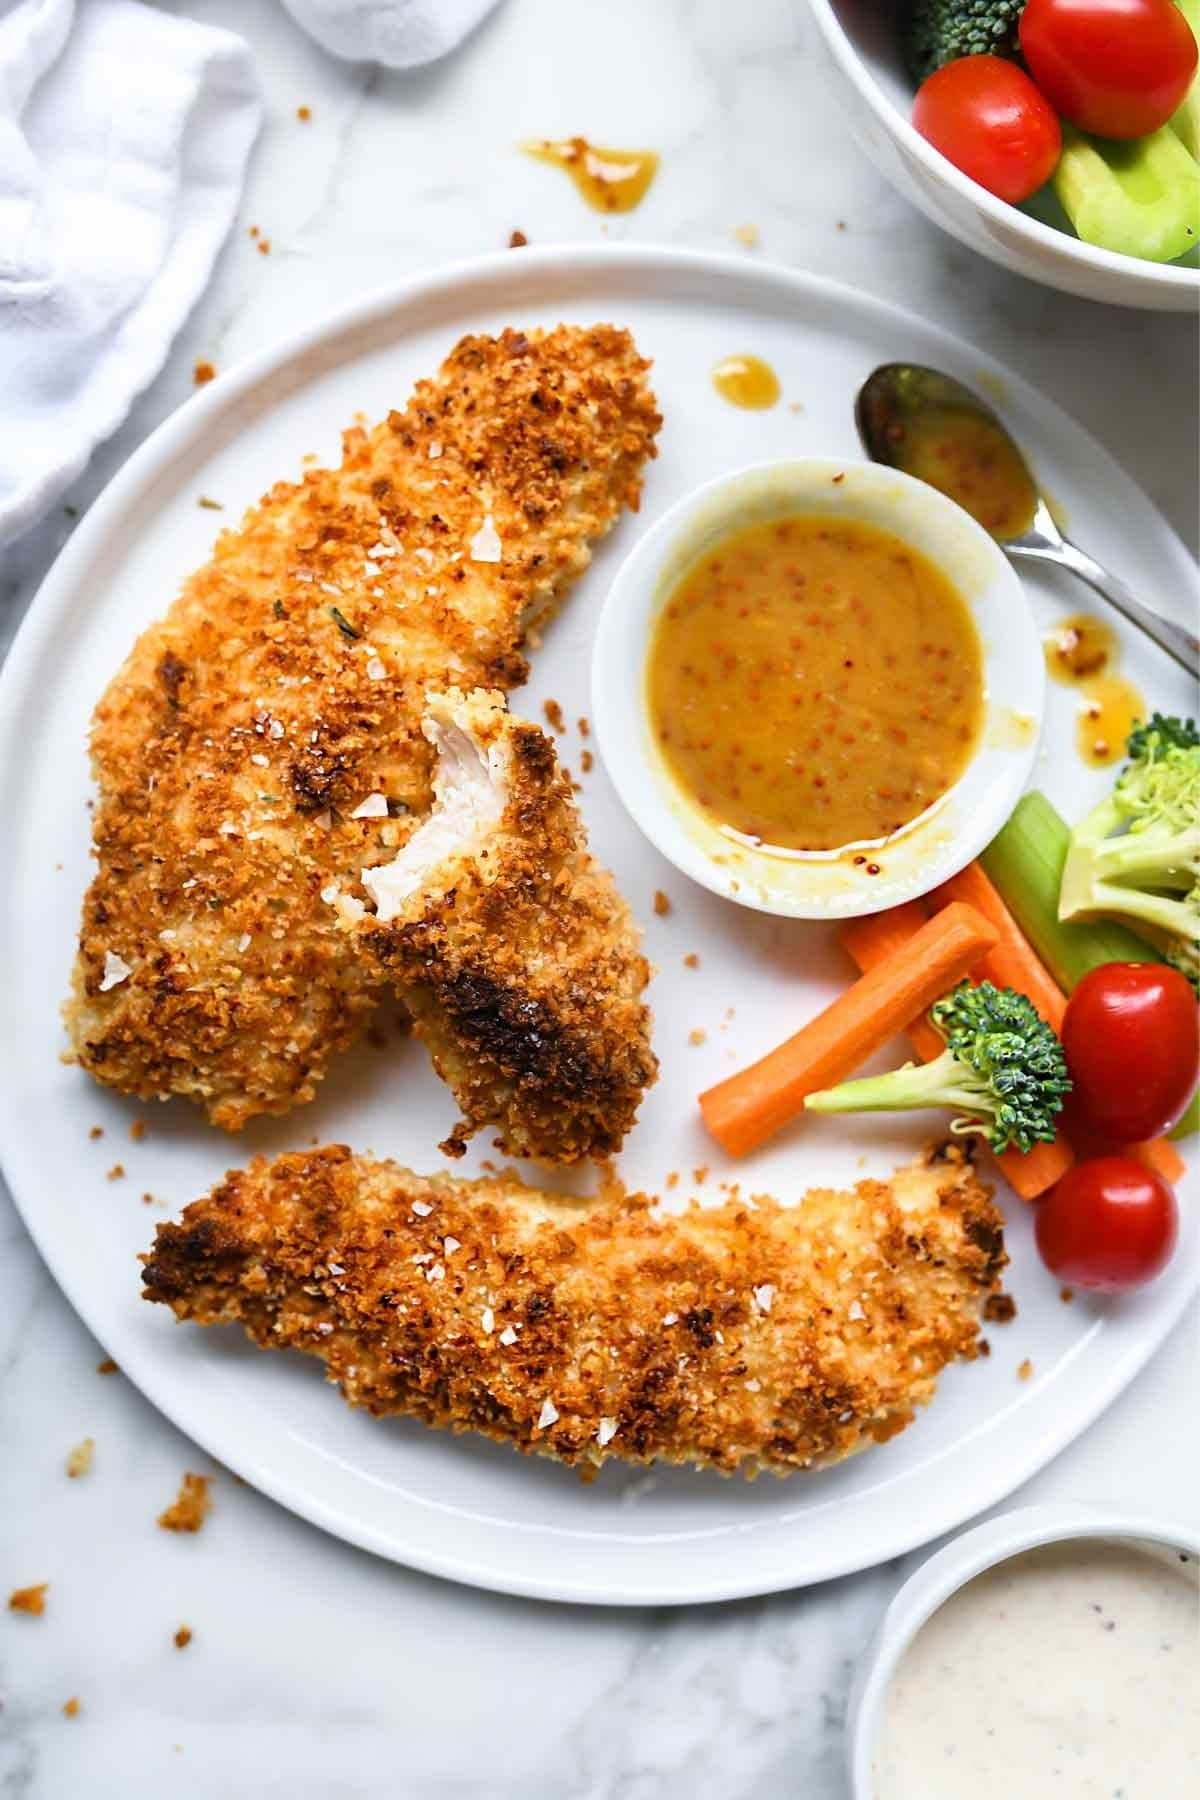 Chicken tenders on white plate with vegetables and honey mustard dip